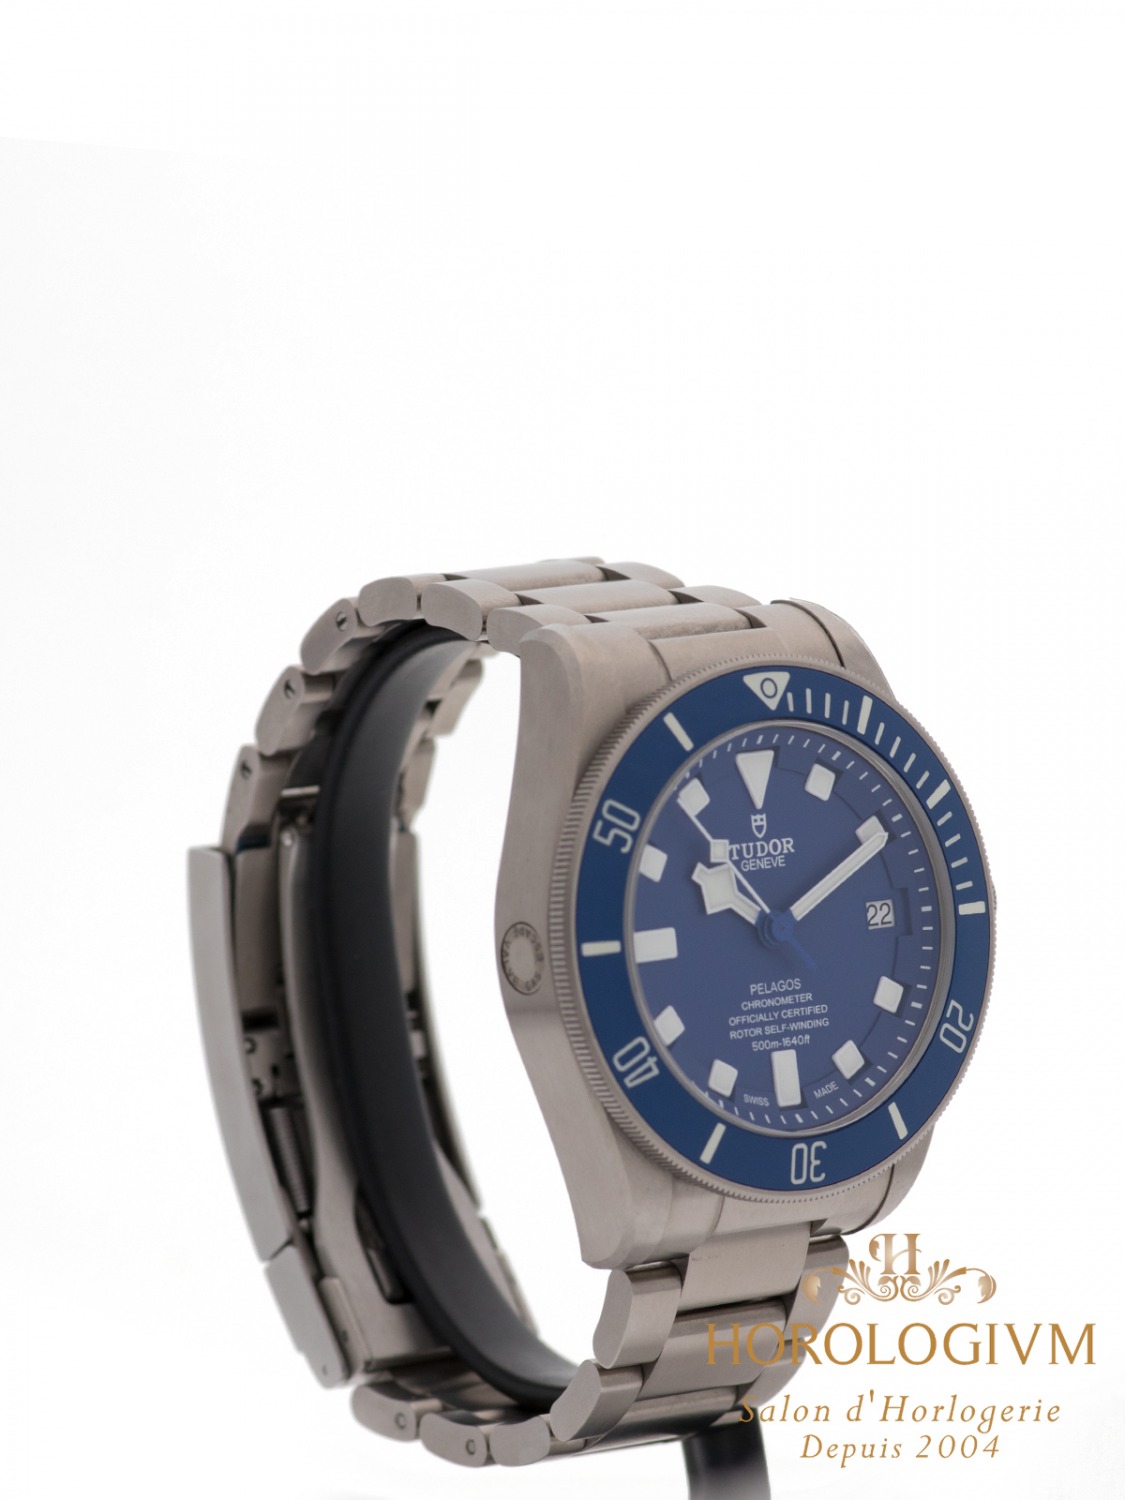 Tudor Pelagos REF. M25600TB-0001 watch, brushed silver (case) and brushed silver & blue (bezel)